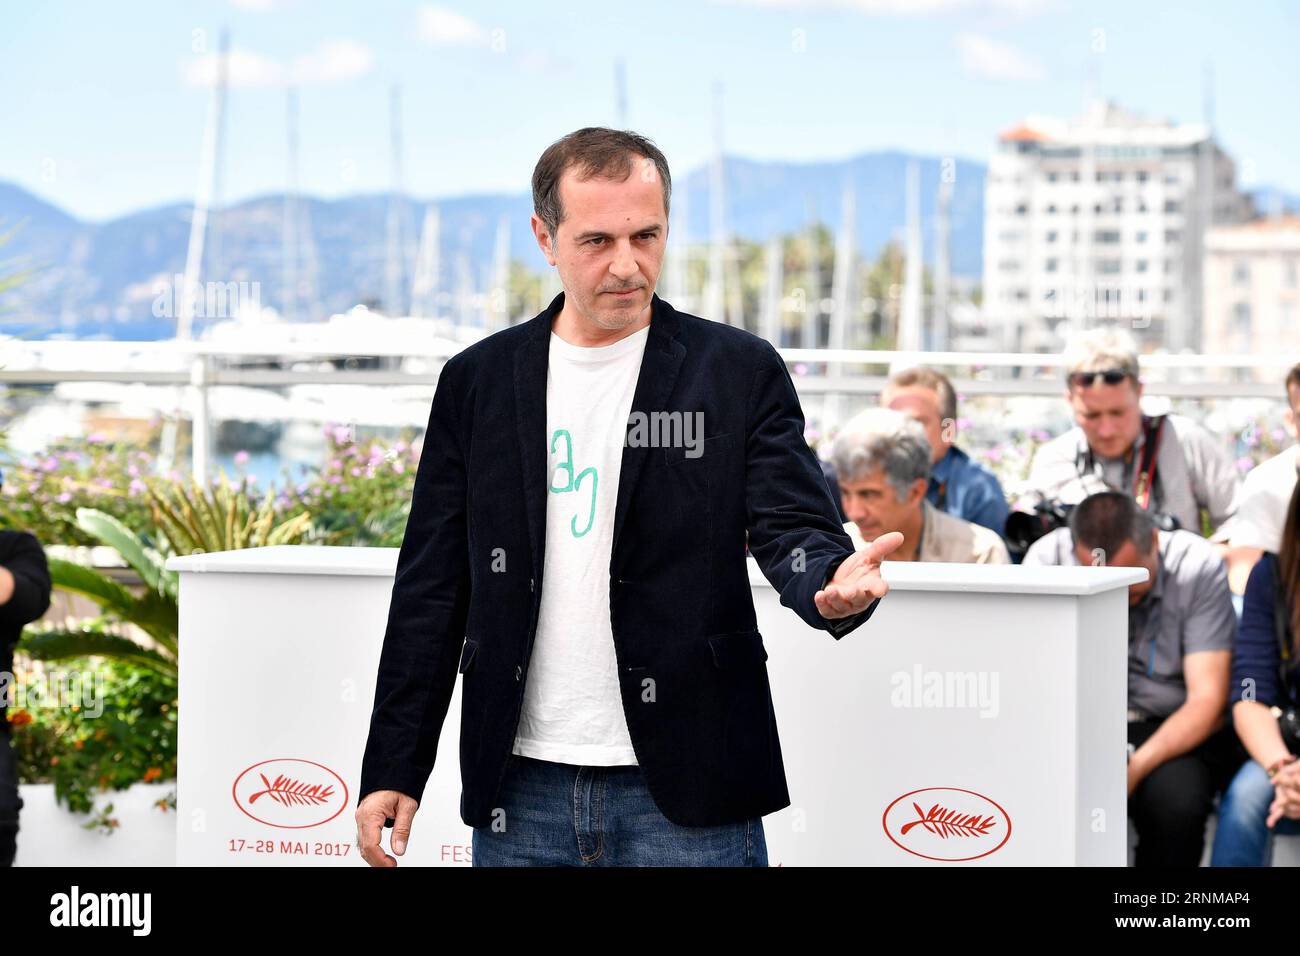 (170519) -- CANNES, May 19, 2017 -- Actor Merab Ninidze of the film Jupiter s Moon poses for a photocall in Cannes, France, on May 19, 2017. The film Jupiter s Moon directed by Hungarian director Kornel Mundruczo will compete for the Palme d Or on the 70th Cannes Film Festival. )(gl) FRANCE-CANNES-70TH CANNES FILM FESTIVAL-IN COMPETITION-JUPITER S MOON-PHOTOCALL ChenxYichen PUBLICATIONxNOTxINxCHN   Cannes May 19 2017 Actor Merab Ninidze of The Film Jupiter S Moon Poses for a photo call in Cannes France ON May 19 2017 The Film Jupiter S Moon Directed by Hungarian Director Kornel Mundruczo will Stock Photo